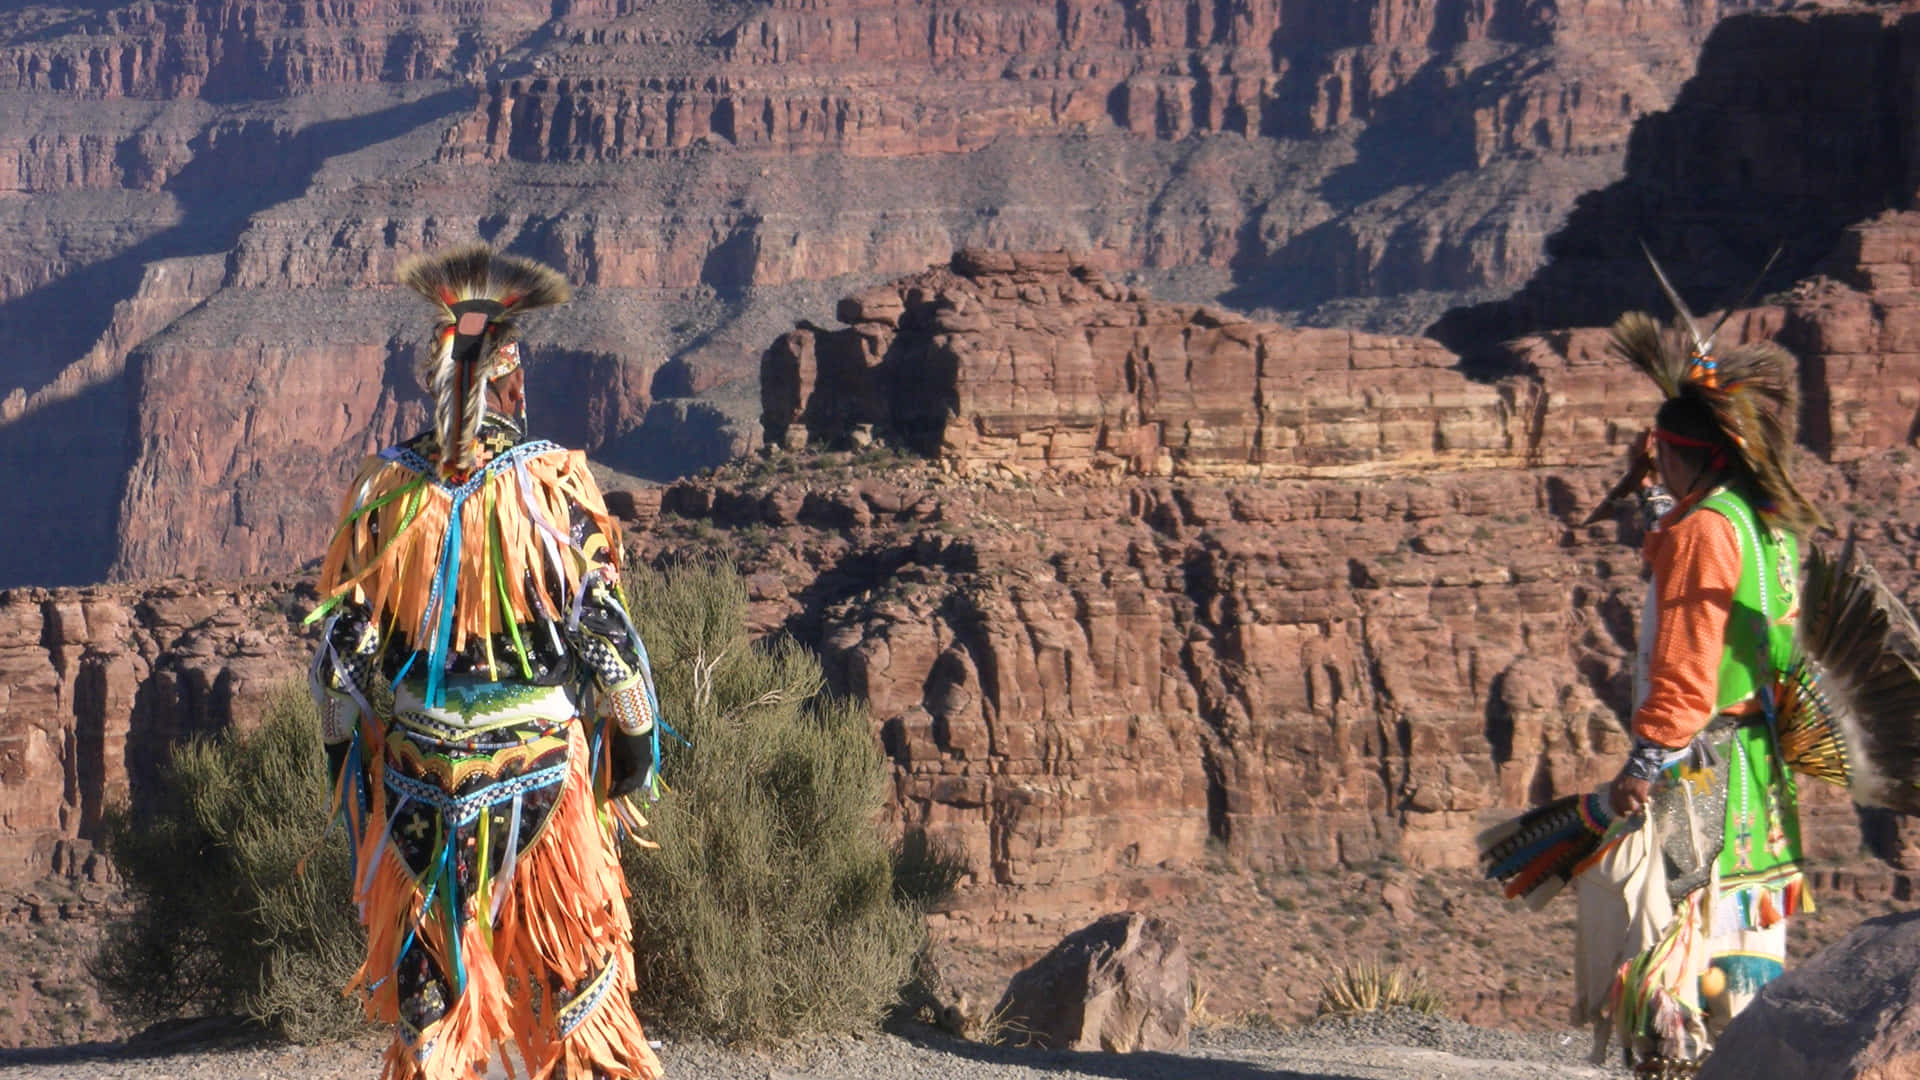 “A Native American Indian wearing traditional dress and headgear stands in the wild.” Wallpaper